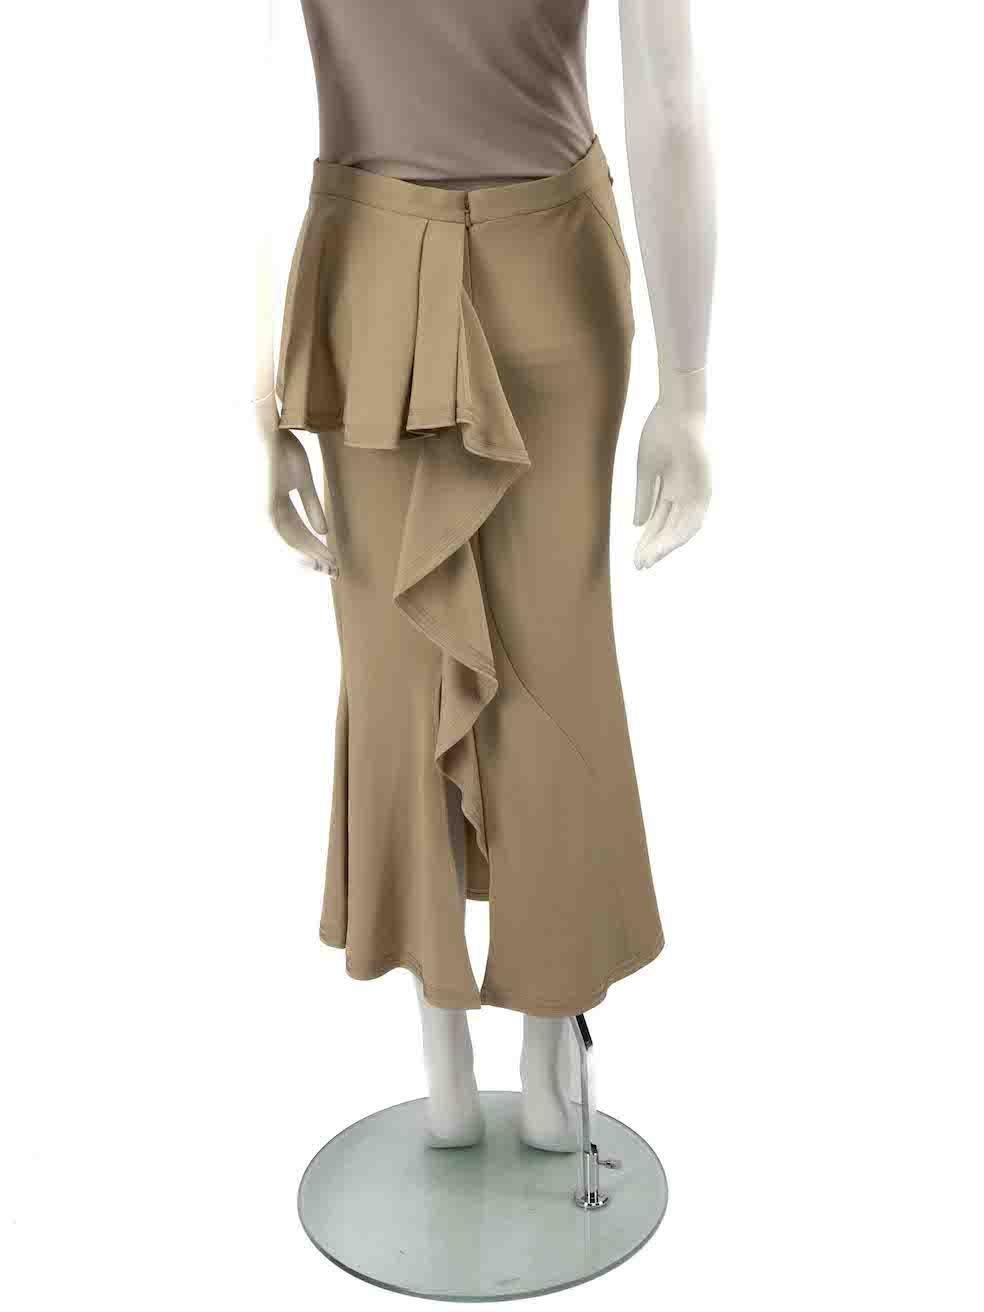 Givenchy Beige Peplum Ruffle Accent Midi Skirt Size L In Good Condition For Sale In London, GB